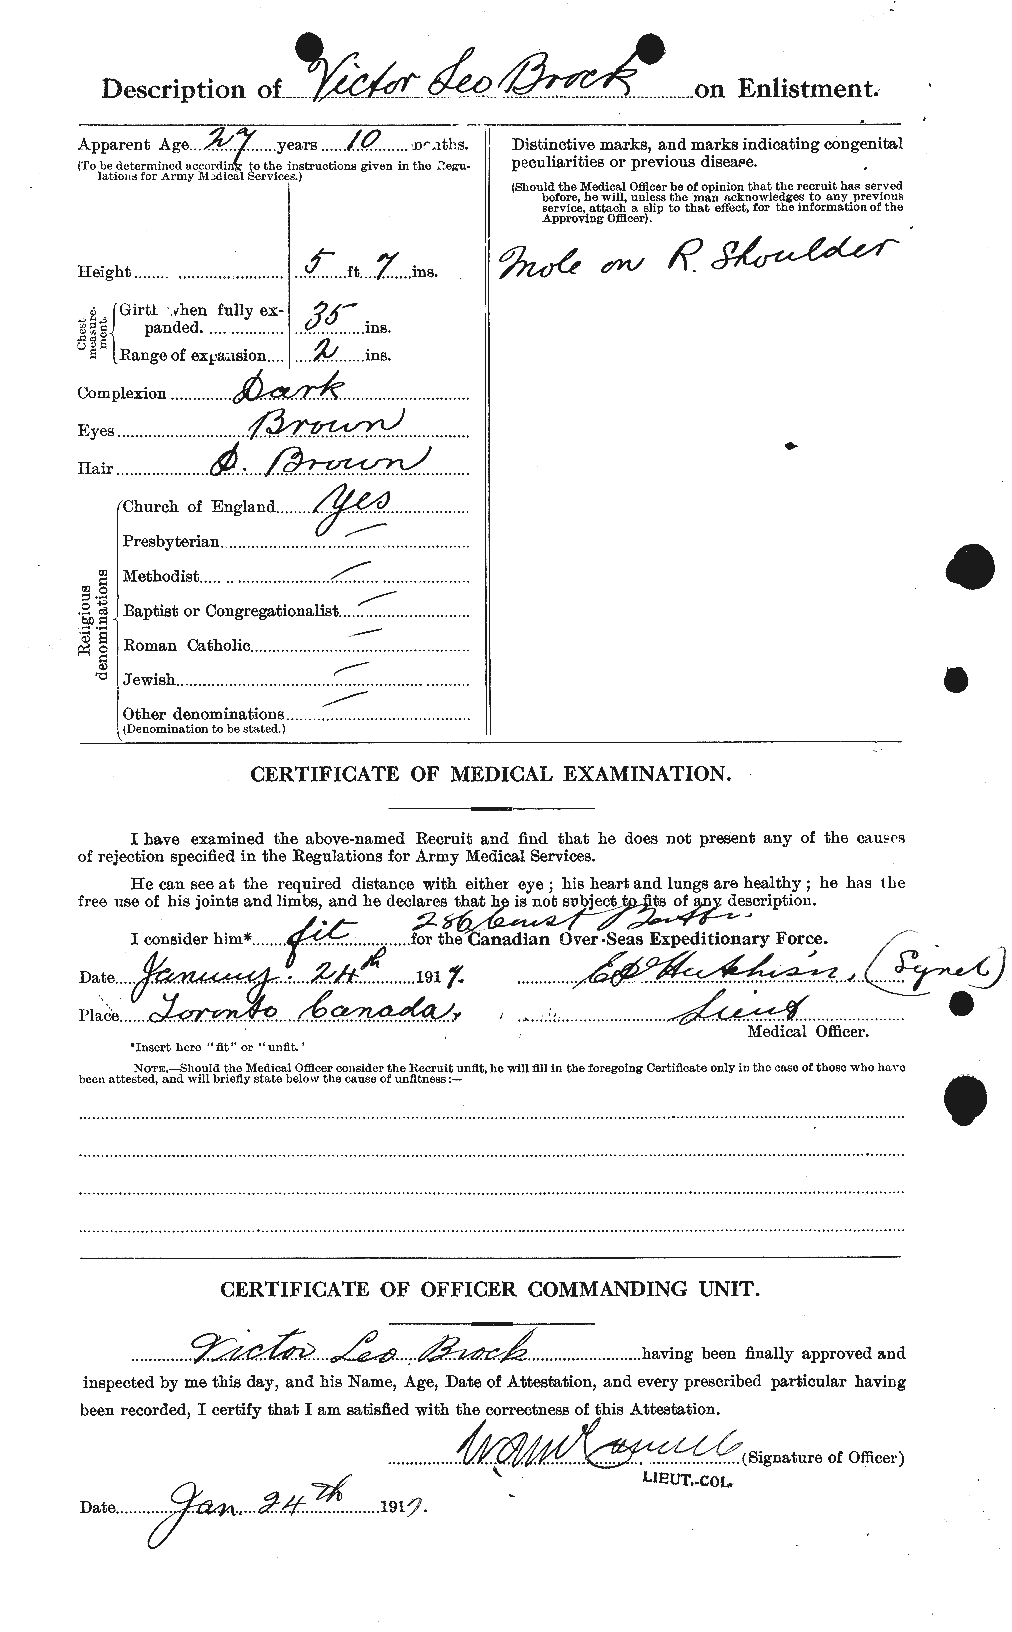 Personnel Records of the First World War - CEF 258244b